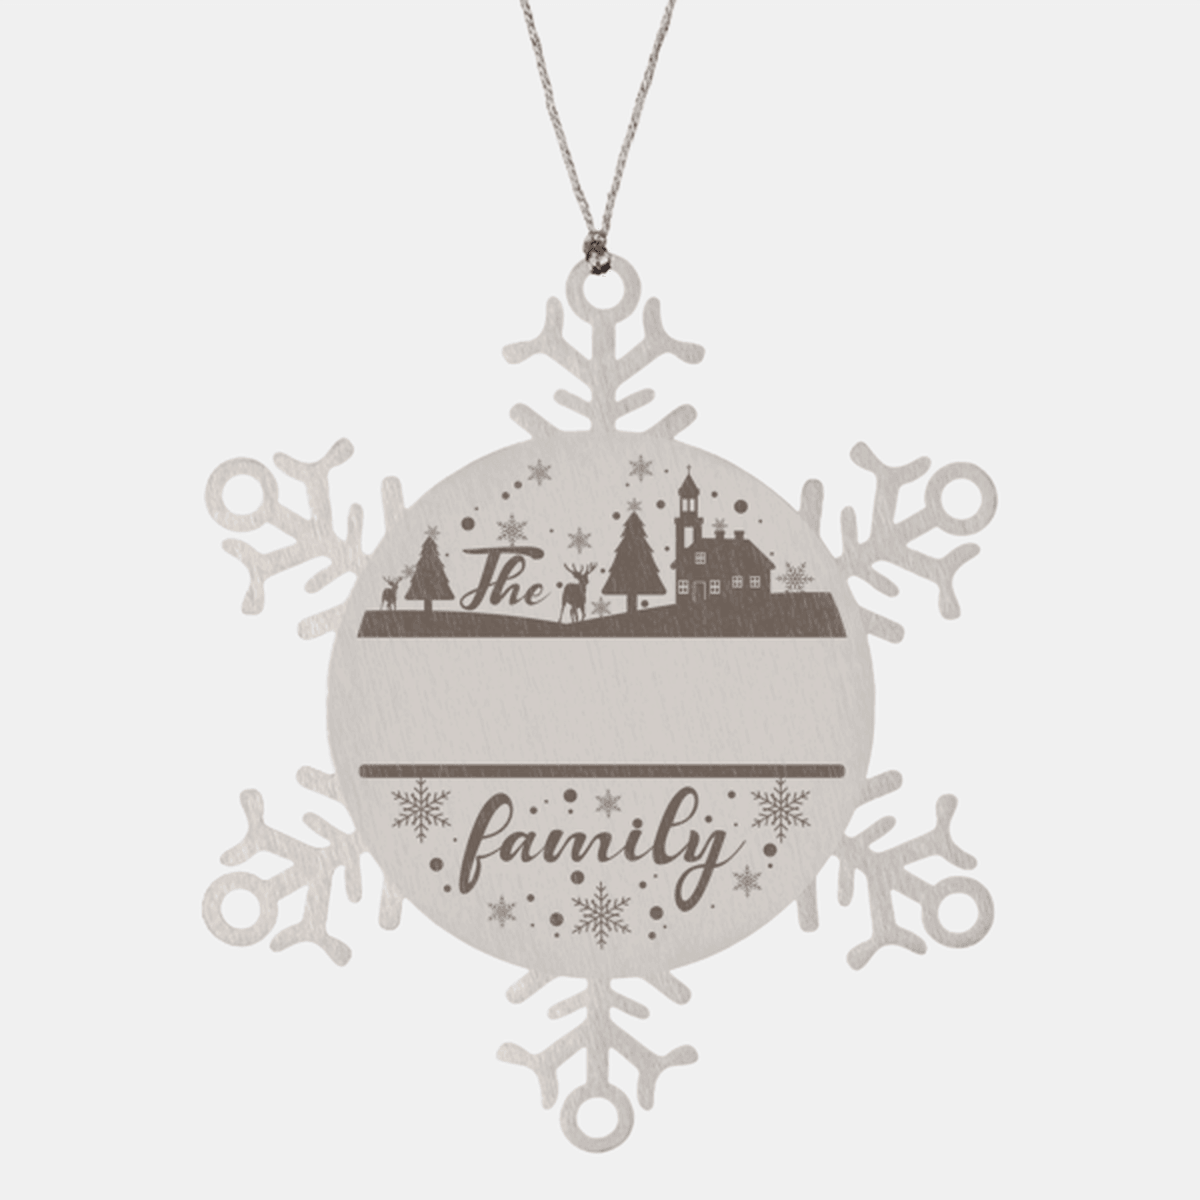 Personalized Family Name Christmas Laser Engraved Stainless Steel Snowflake Tree Ornament - Mallard Moon Gift Shop